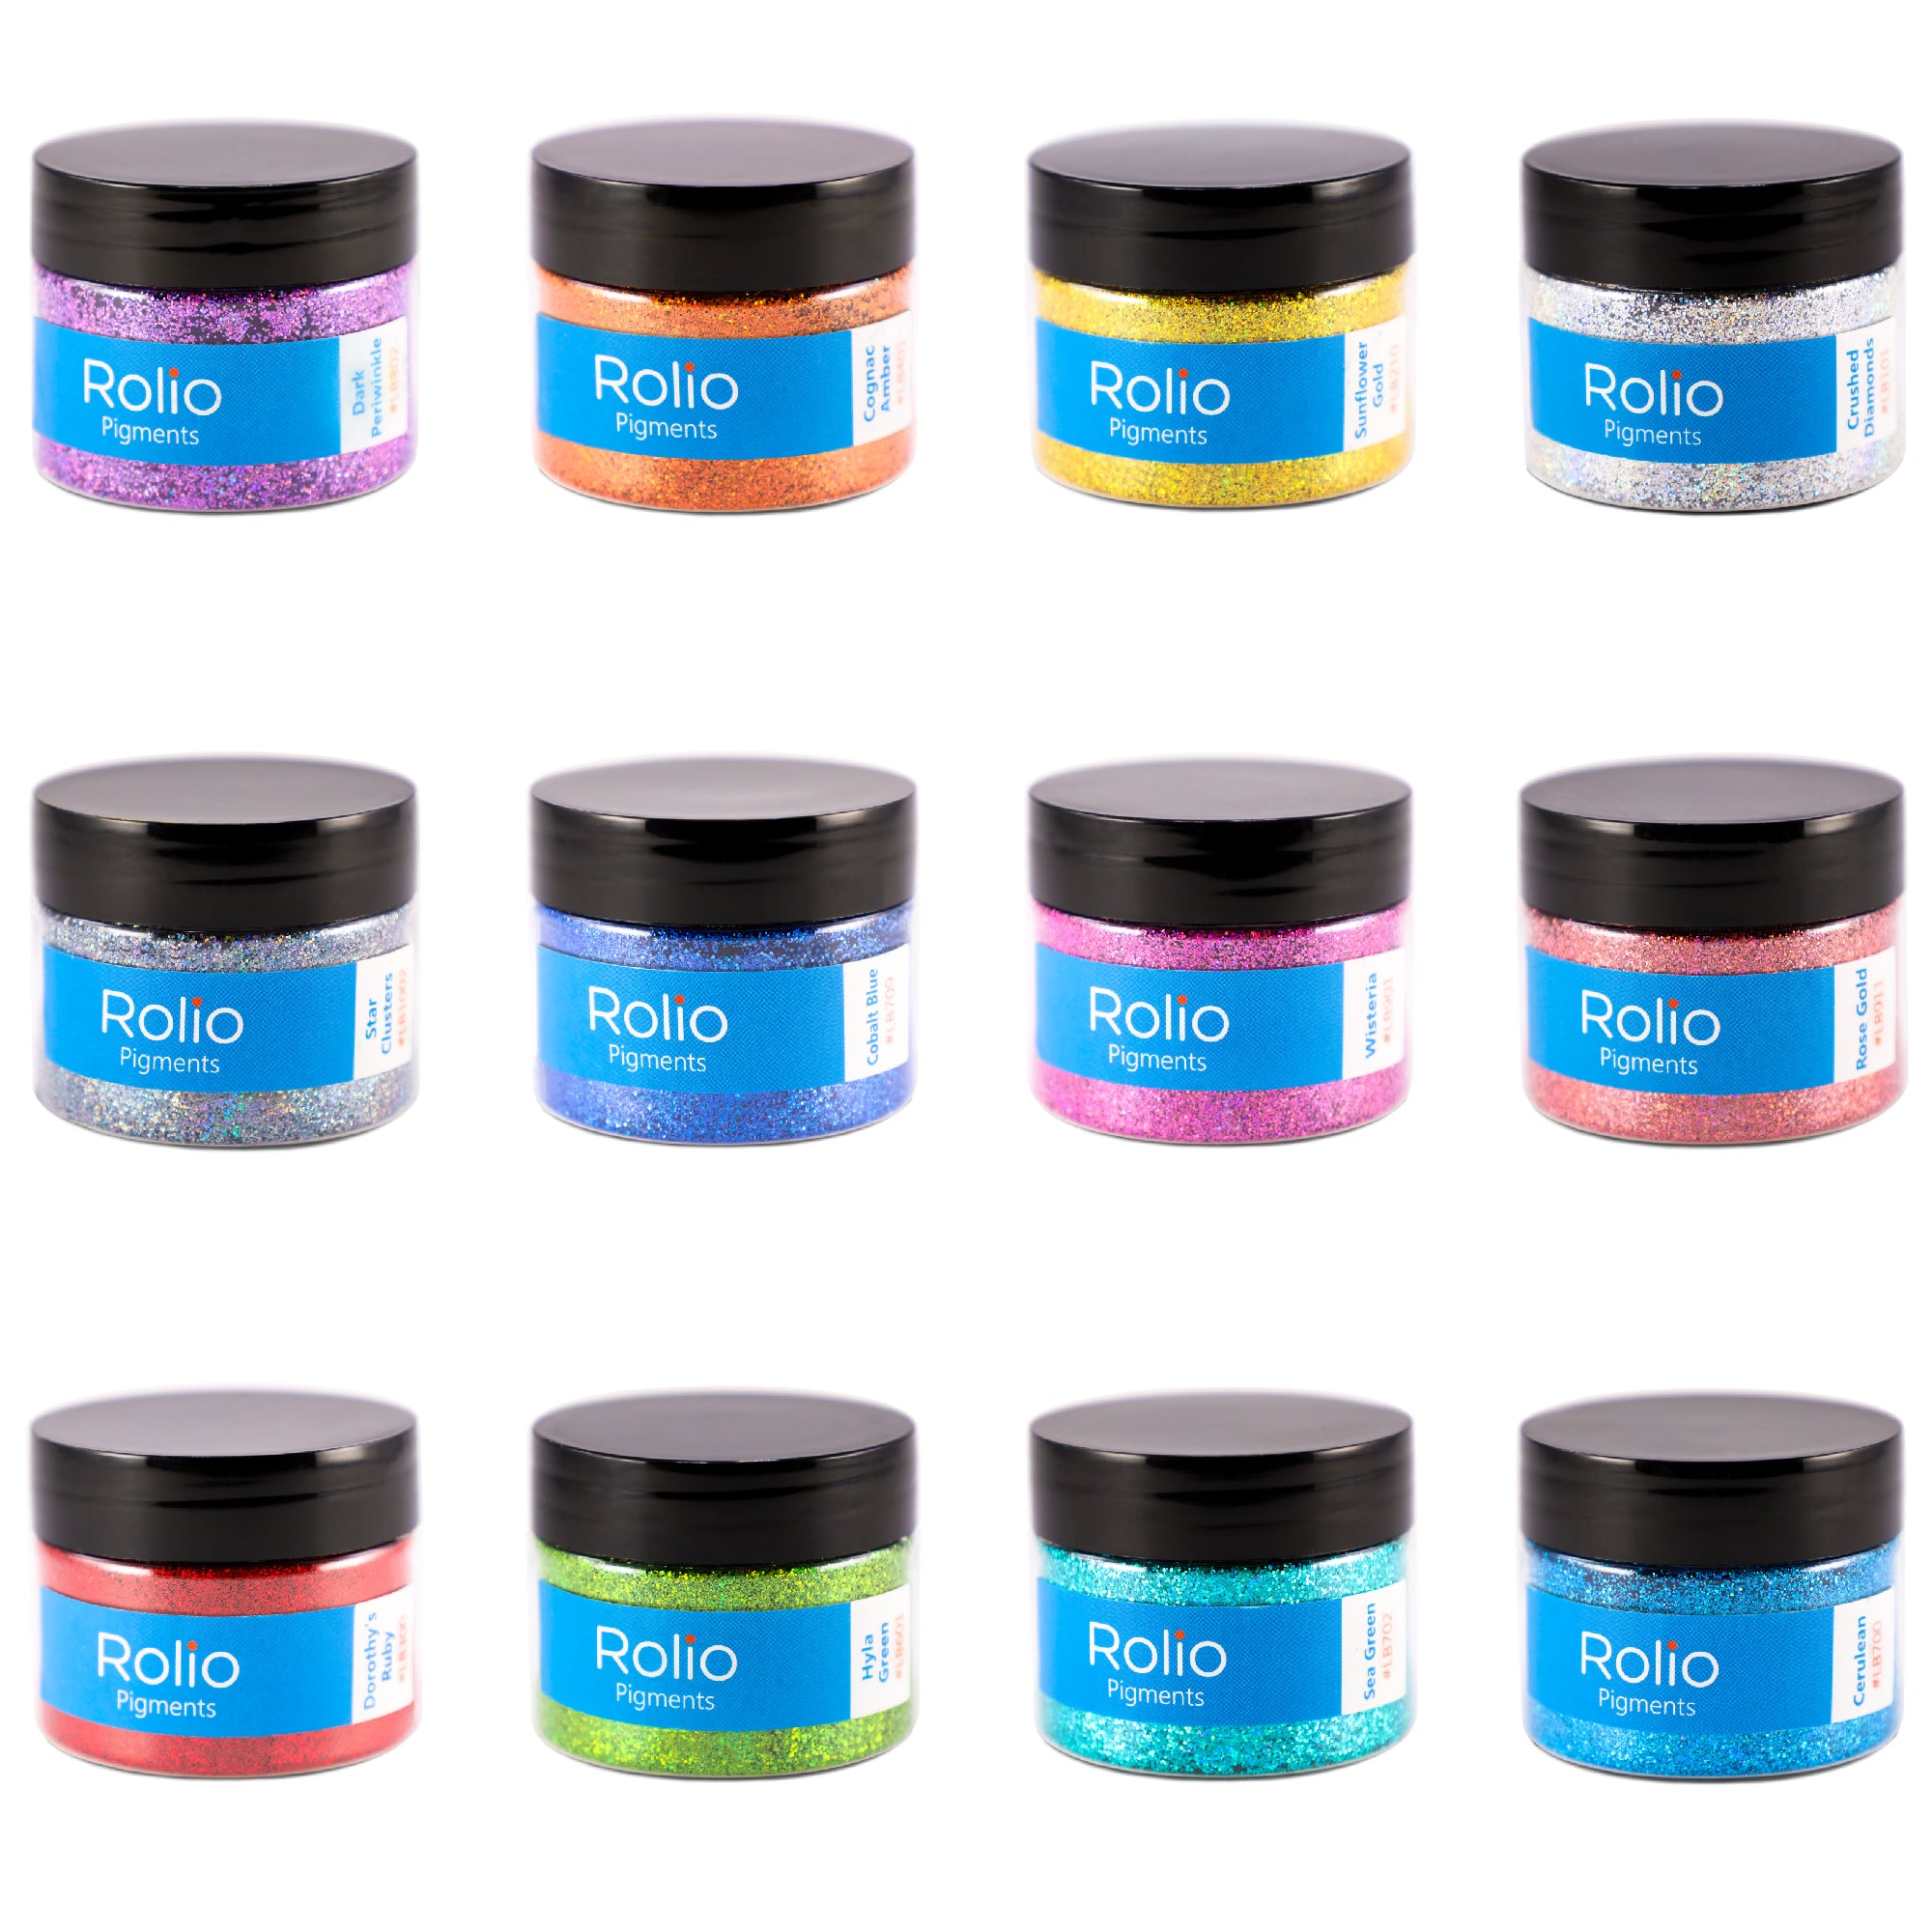 Rolio - Holographic Glitter - Pure Glitter Set - 12 Jars of Cosmetic Grade Glitter for Resin, Makeup, Face & Body Art, Craft Supplies, Nail